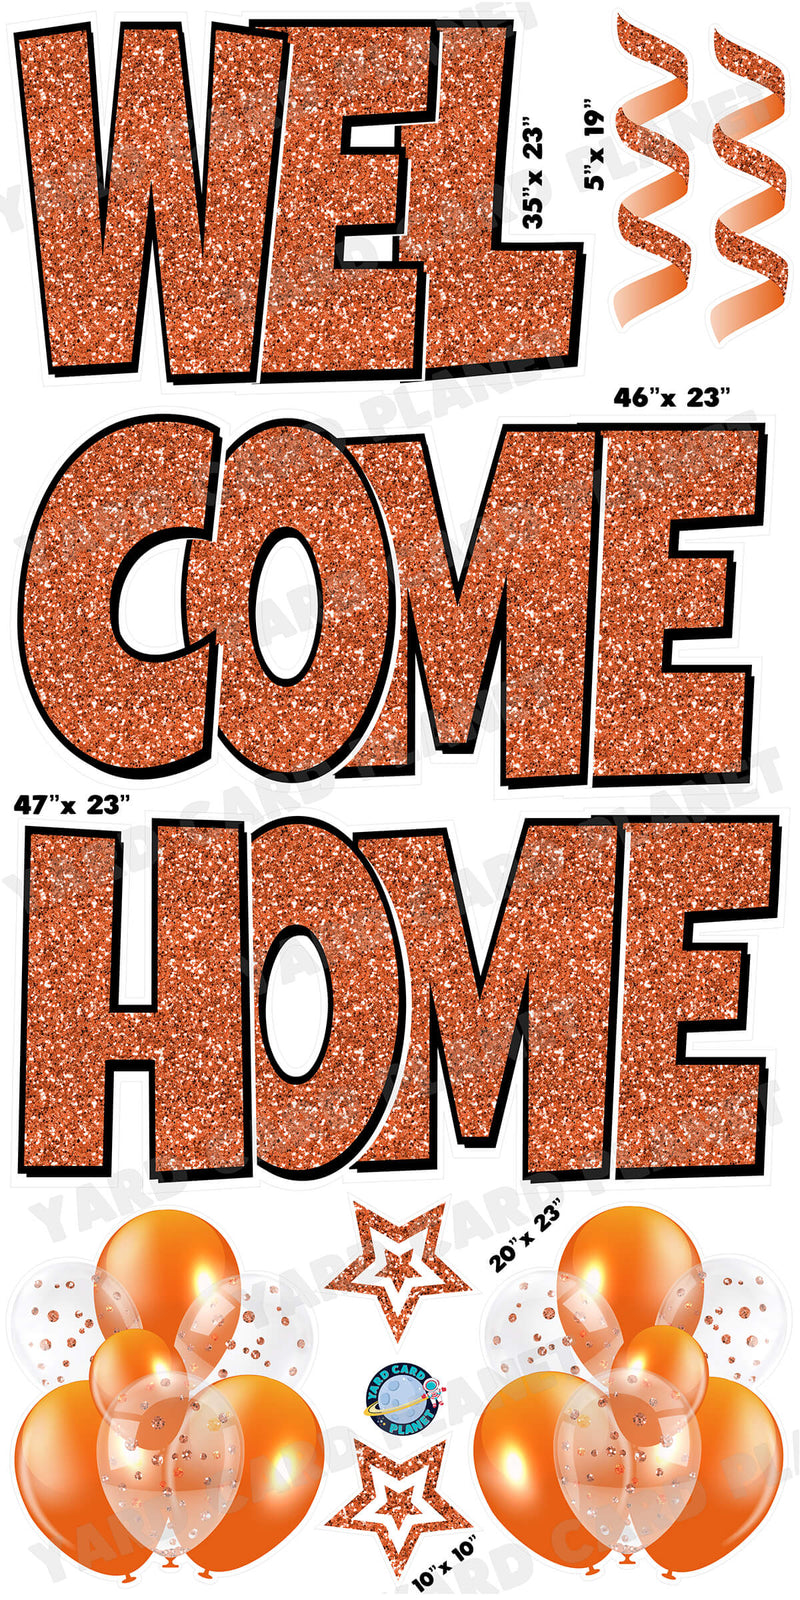 Large 23" Welcome Home Yard Card EZ Quick Sets in Luckiest Guy Font and Flair in Orange Glitter Pattern